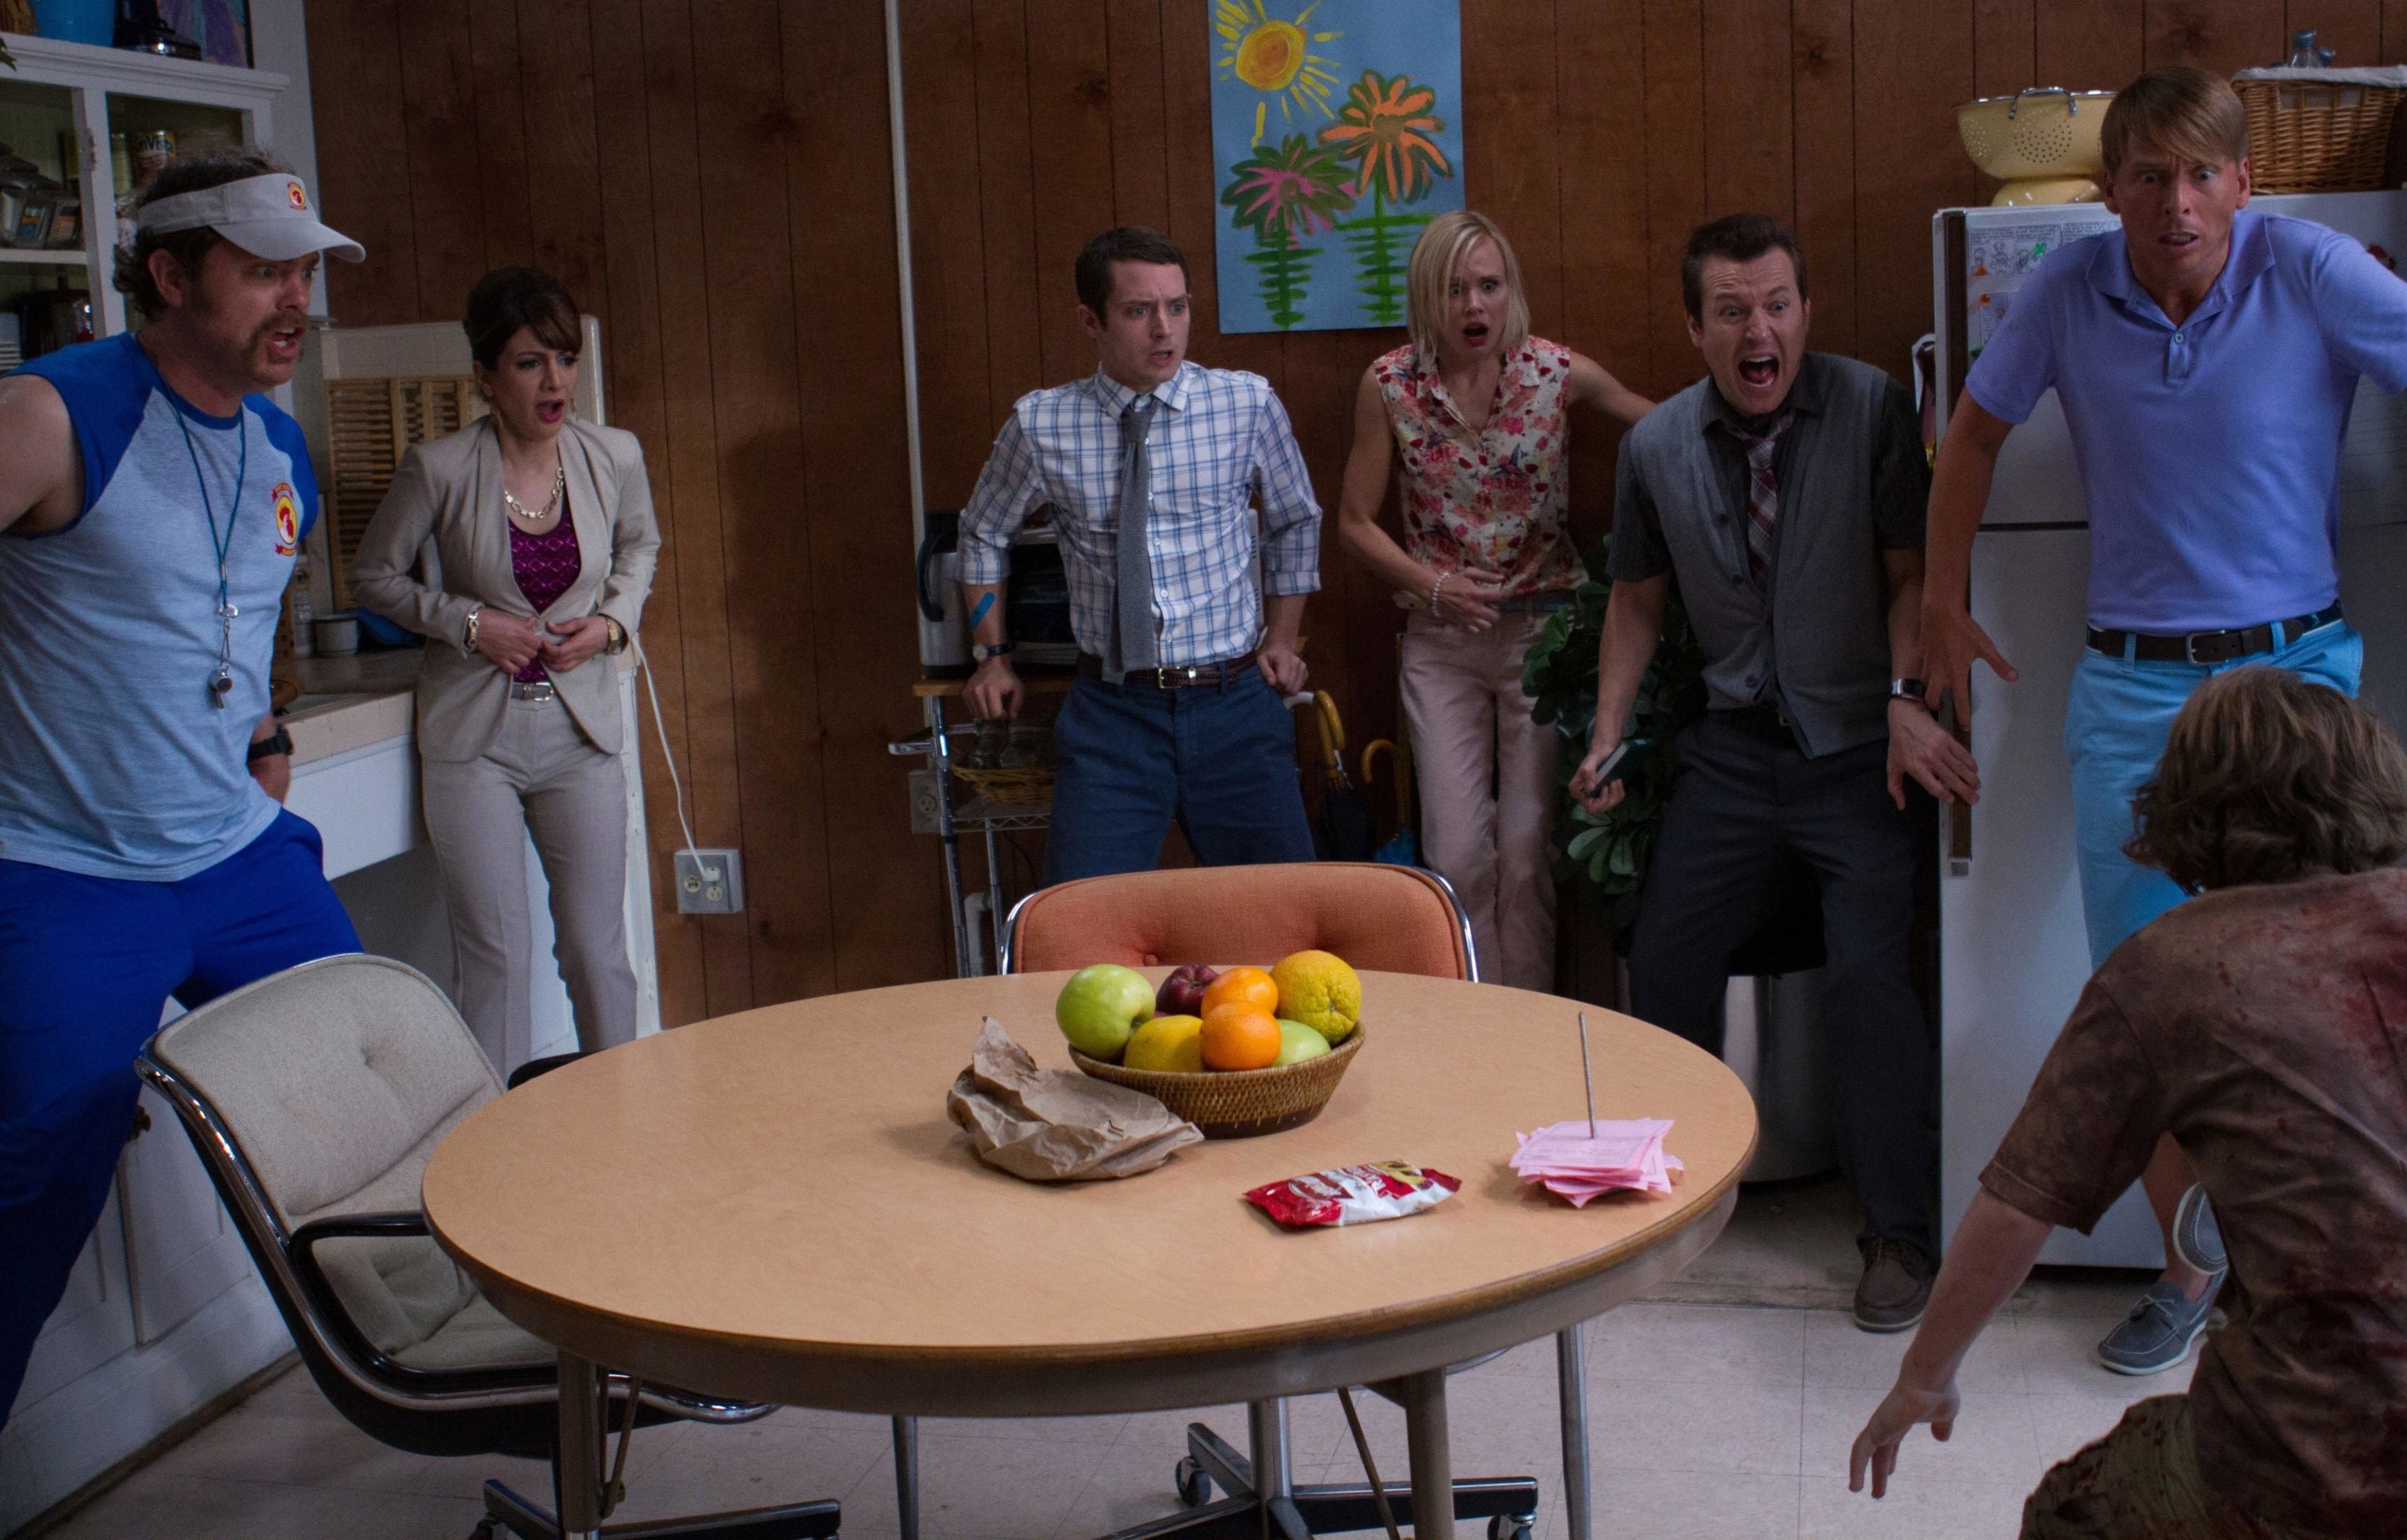 Rainn Wilson, Nasim Pedrad, Elijah Wood, Alison Pill, Leigh Whannell and Jack McBrayer in &quot;Cooties&quot;